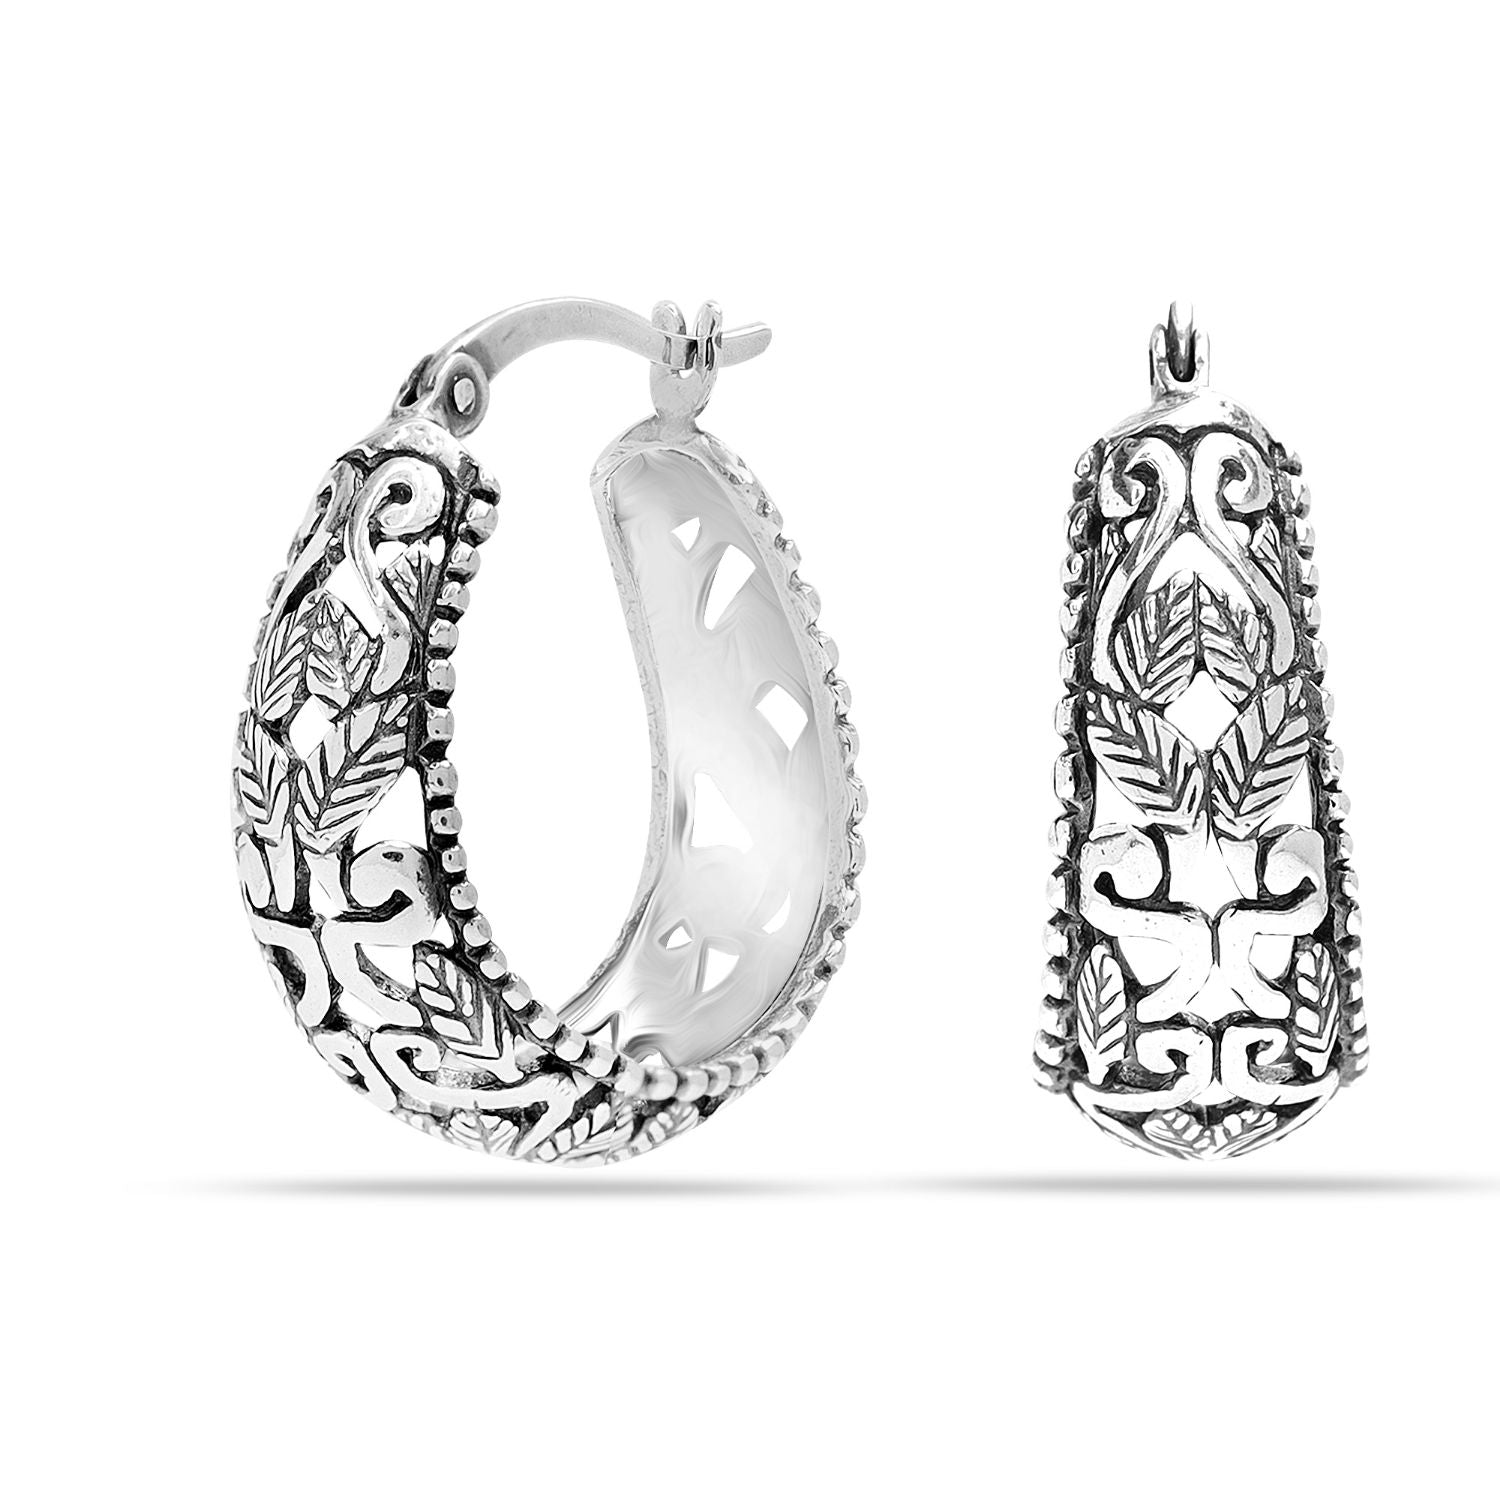 925 Sterling Silver Antique Floral Filigree Light-Weight Small Oval Hoop Earrings for Women